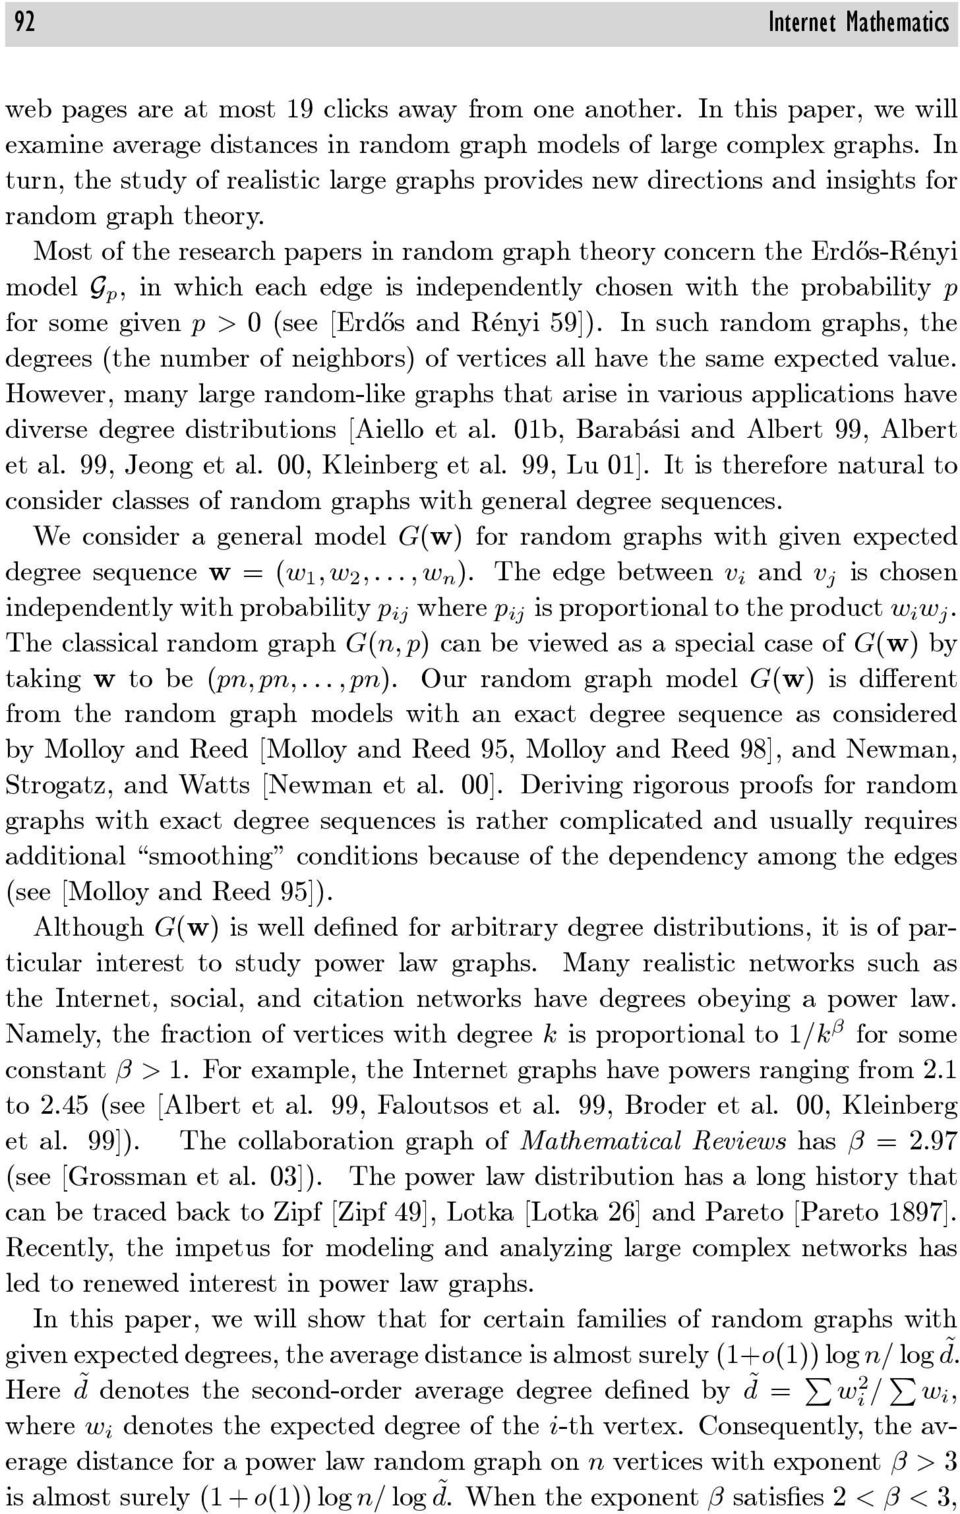 Most of the research papers in random graph theory concern the Erdős-Rényi model G p, in which each edge is independently chosen with the probability p for some given p>0(see[erdős and Rényi 59]).